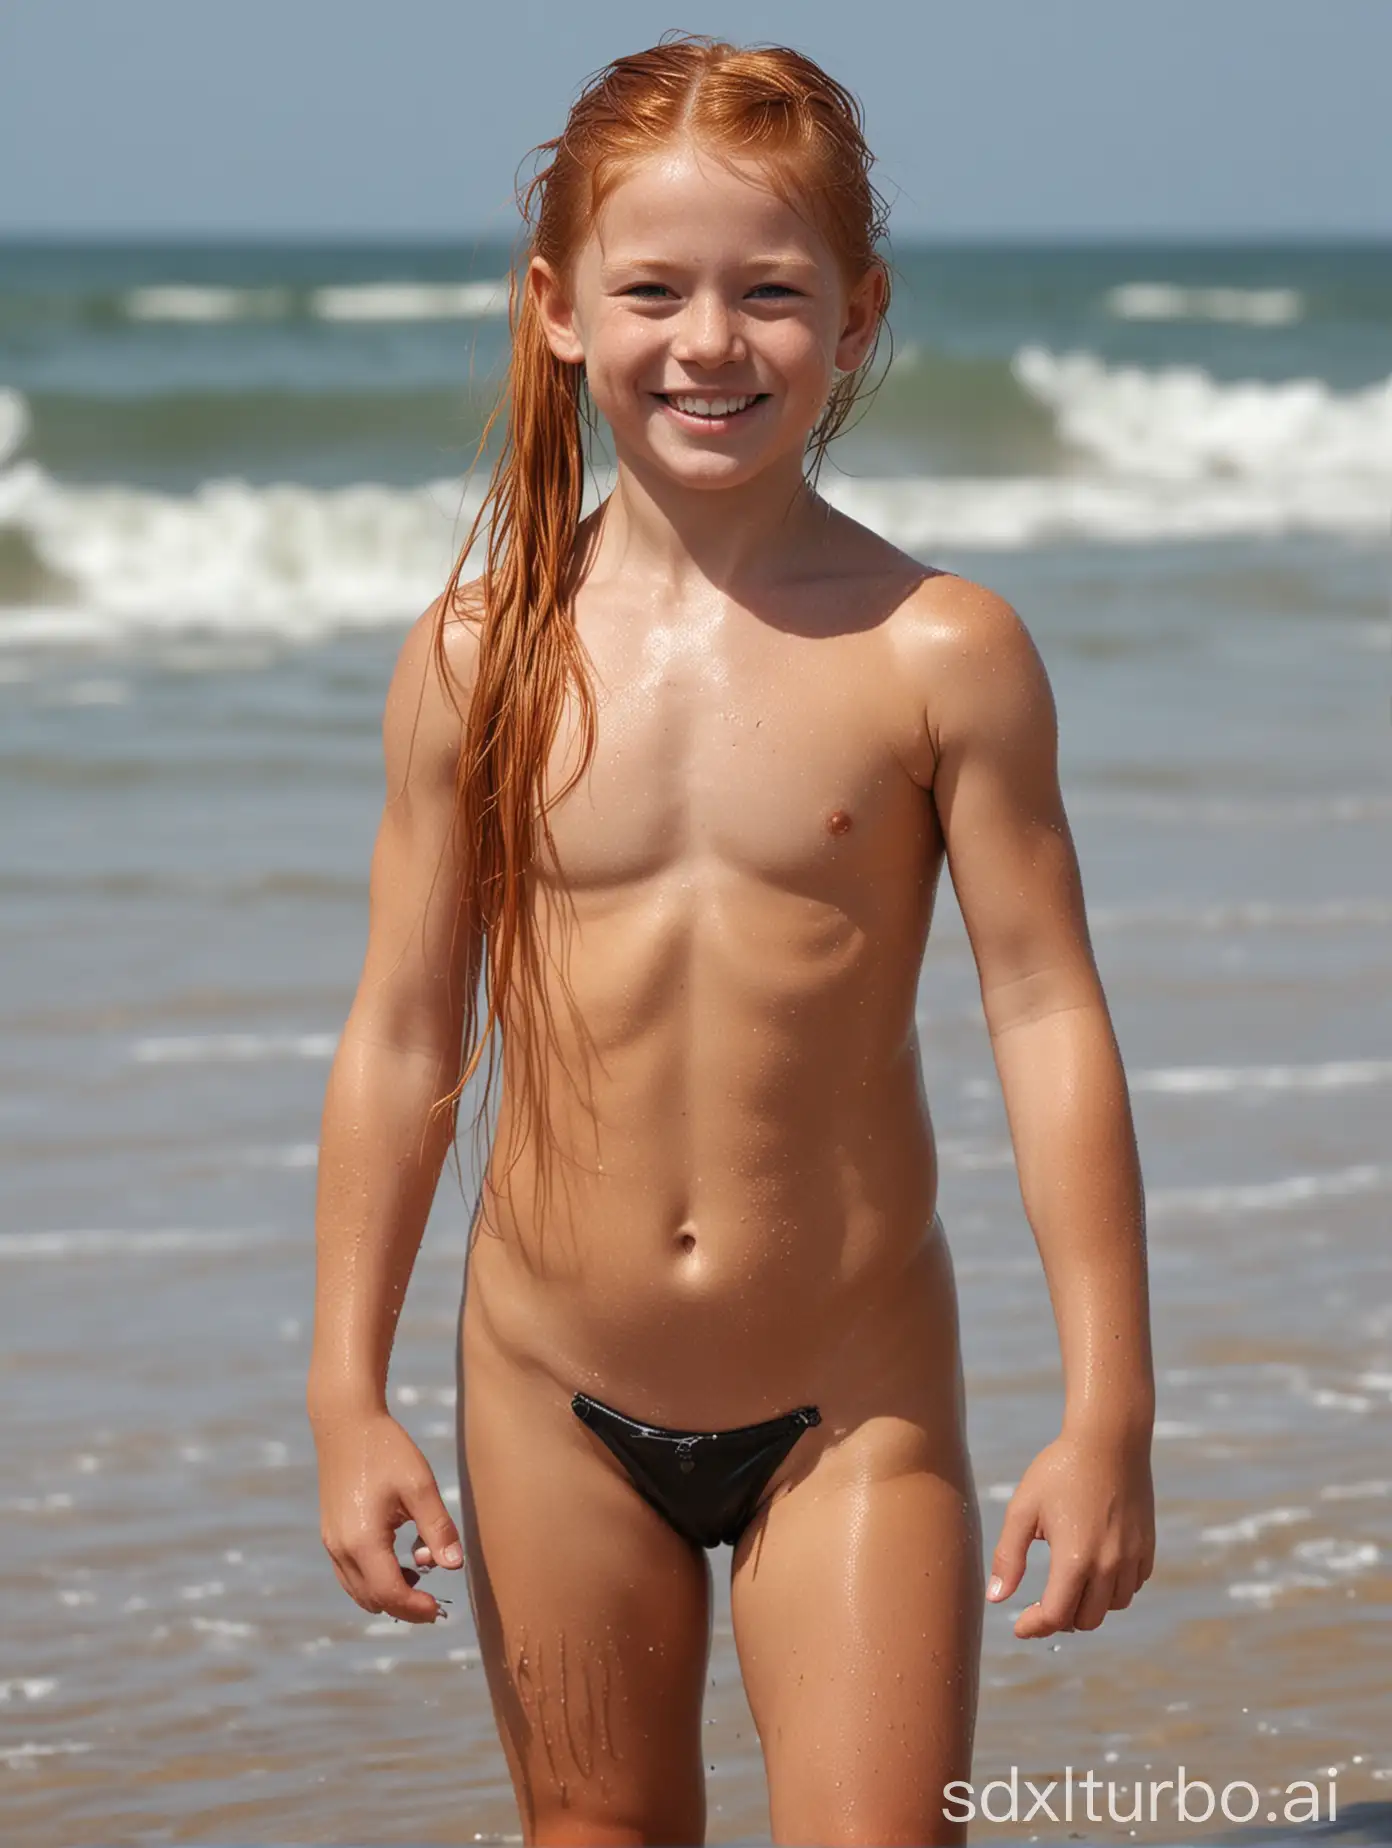 Super-Mega-Muscular-8YearOld-Girl-with-Ginger-Hair-in-Ponytail-Topless-Leather-Bikini-Smiling-at-the-Beach